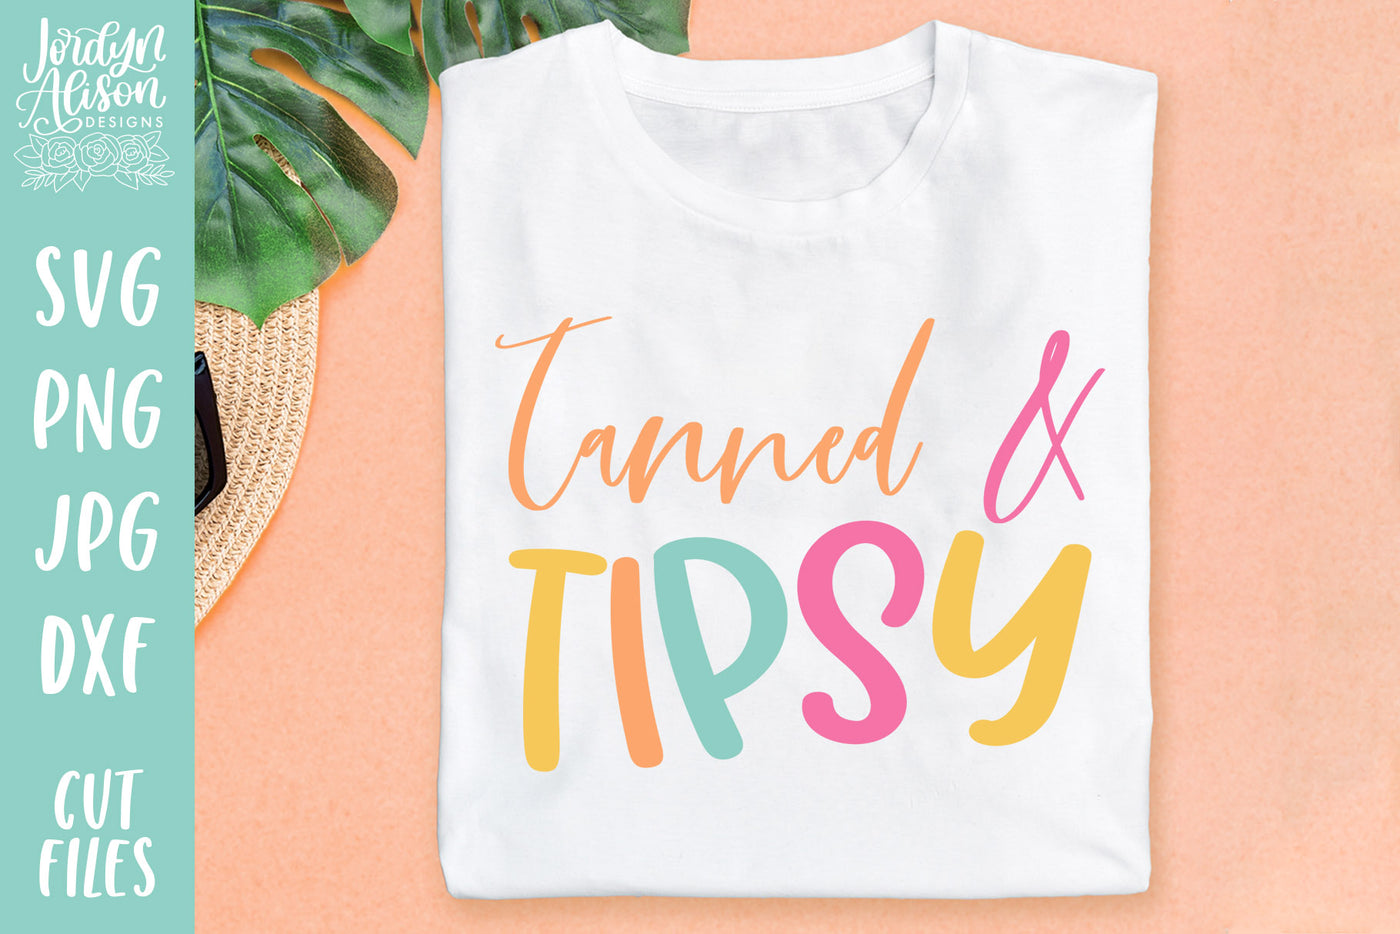 Tanned and Tipsy V2 SVG